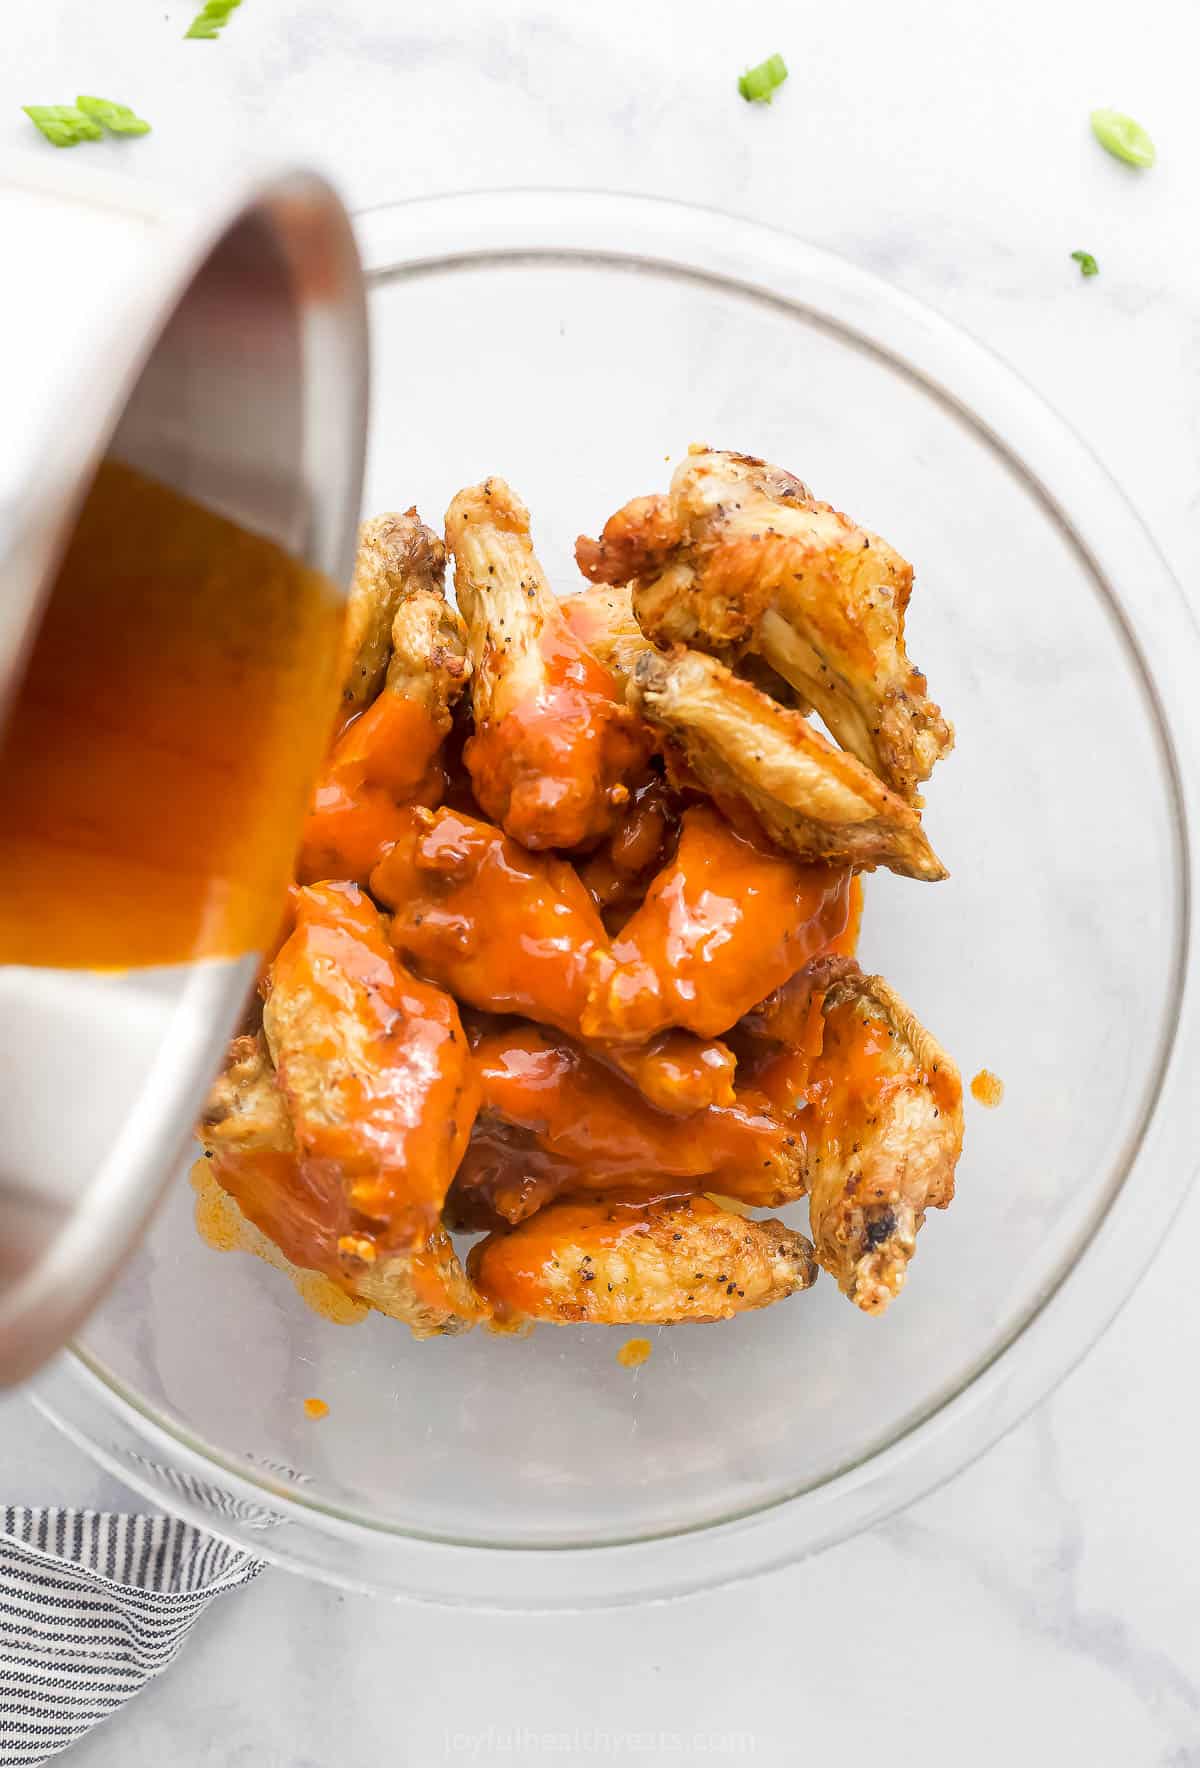 A bowl of buffalo sauce being poured into a bowl filled with air-fried chicken wings